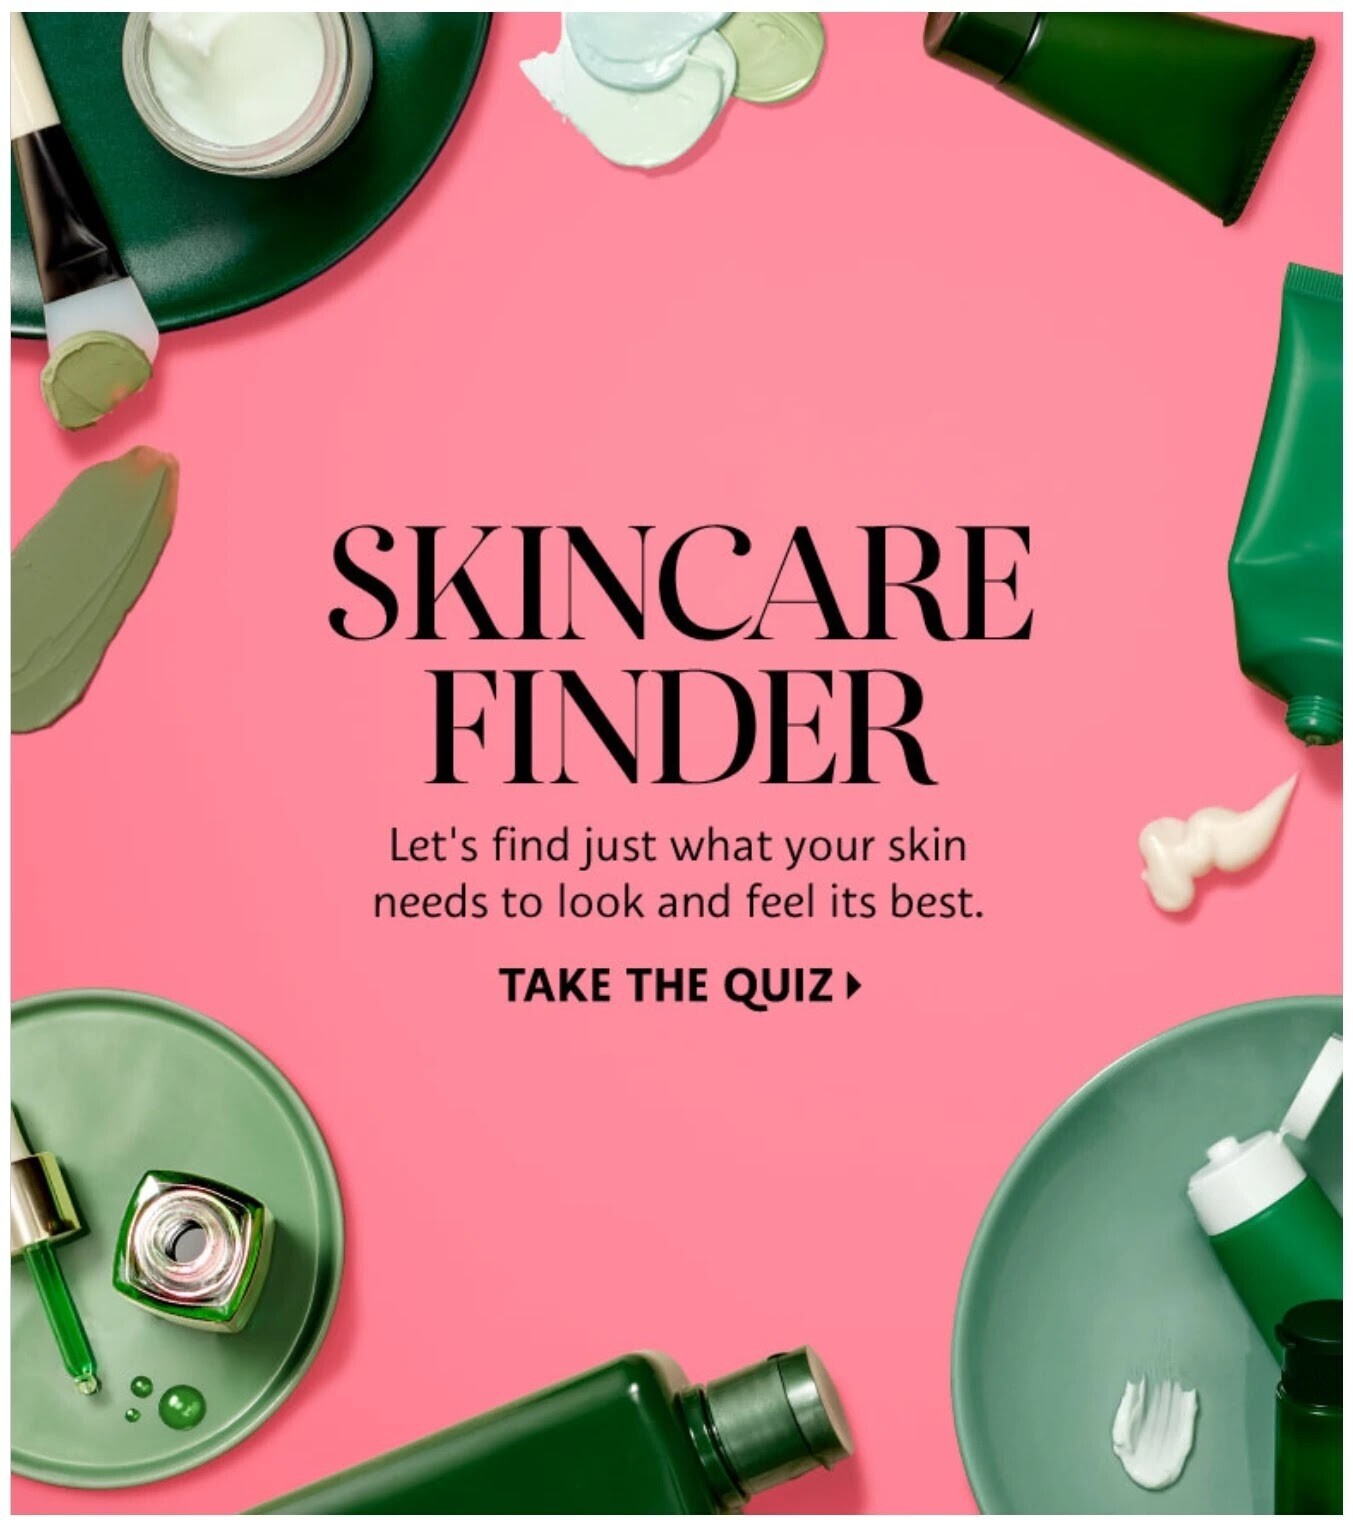 Sephora skincare finder quiz for customers to find out best products for their skin